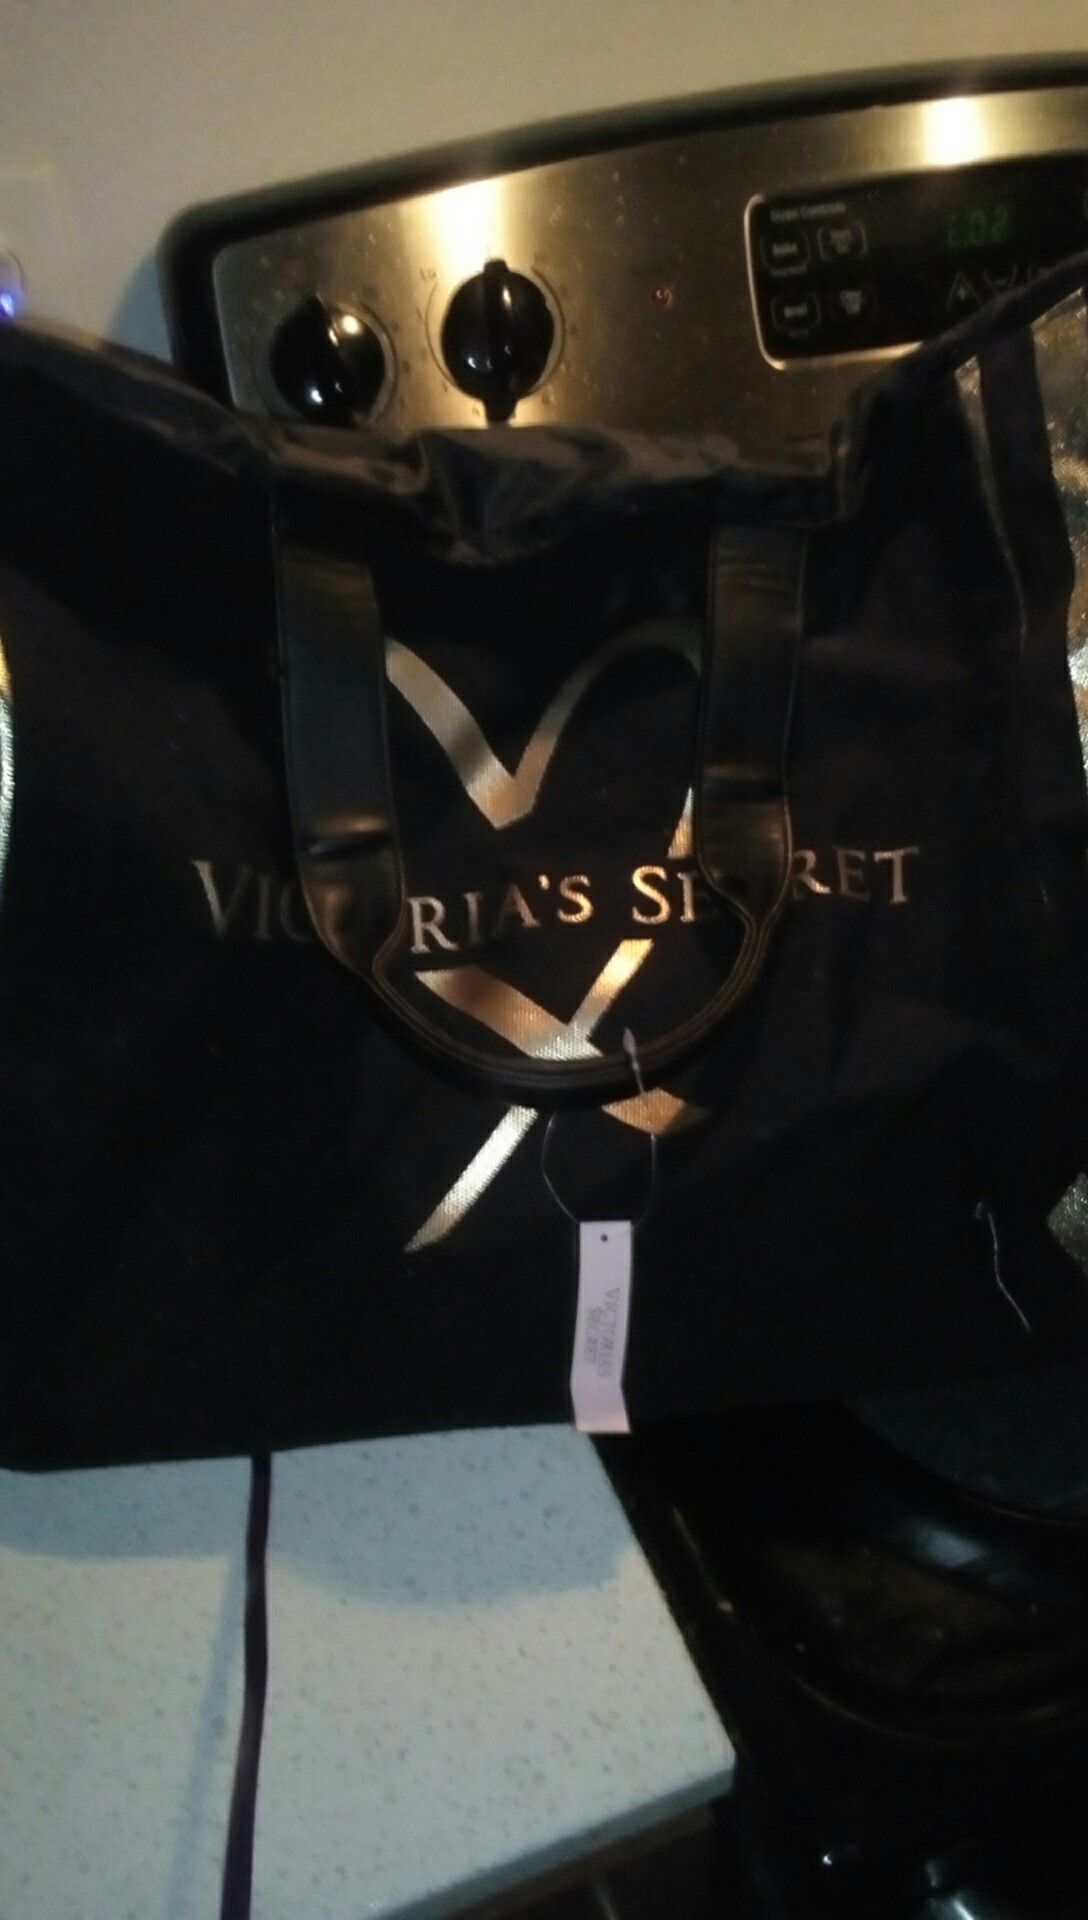 Victoria secret carry all travel bag. Brand new with tags. Retails for $54.